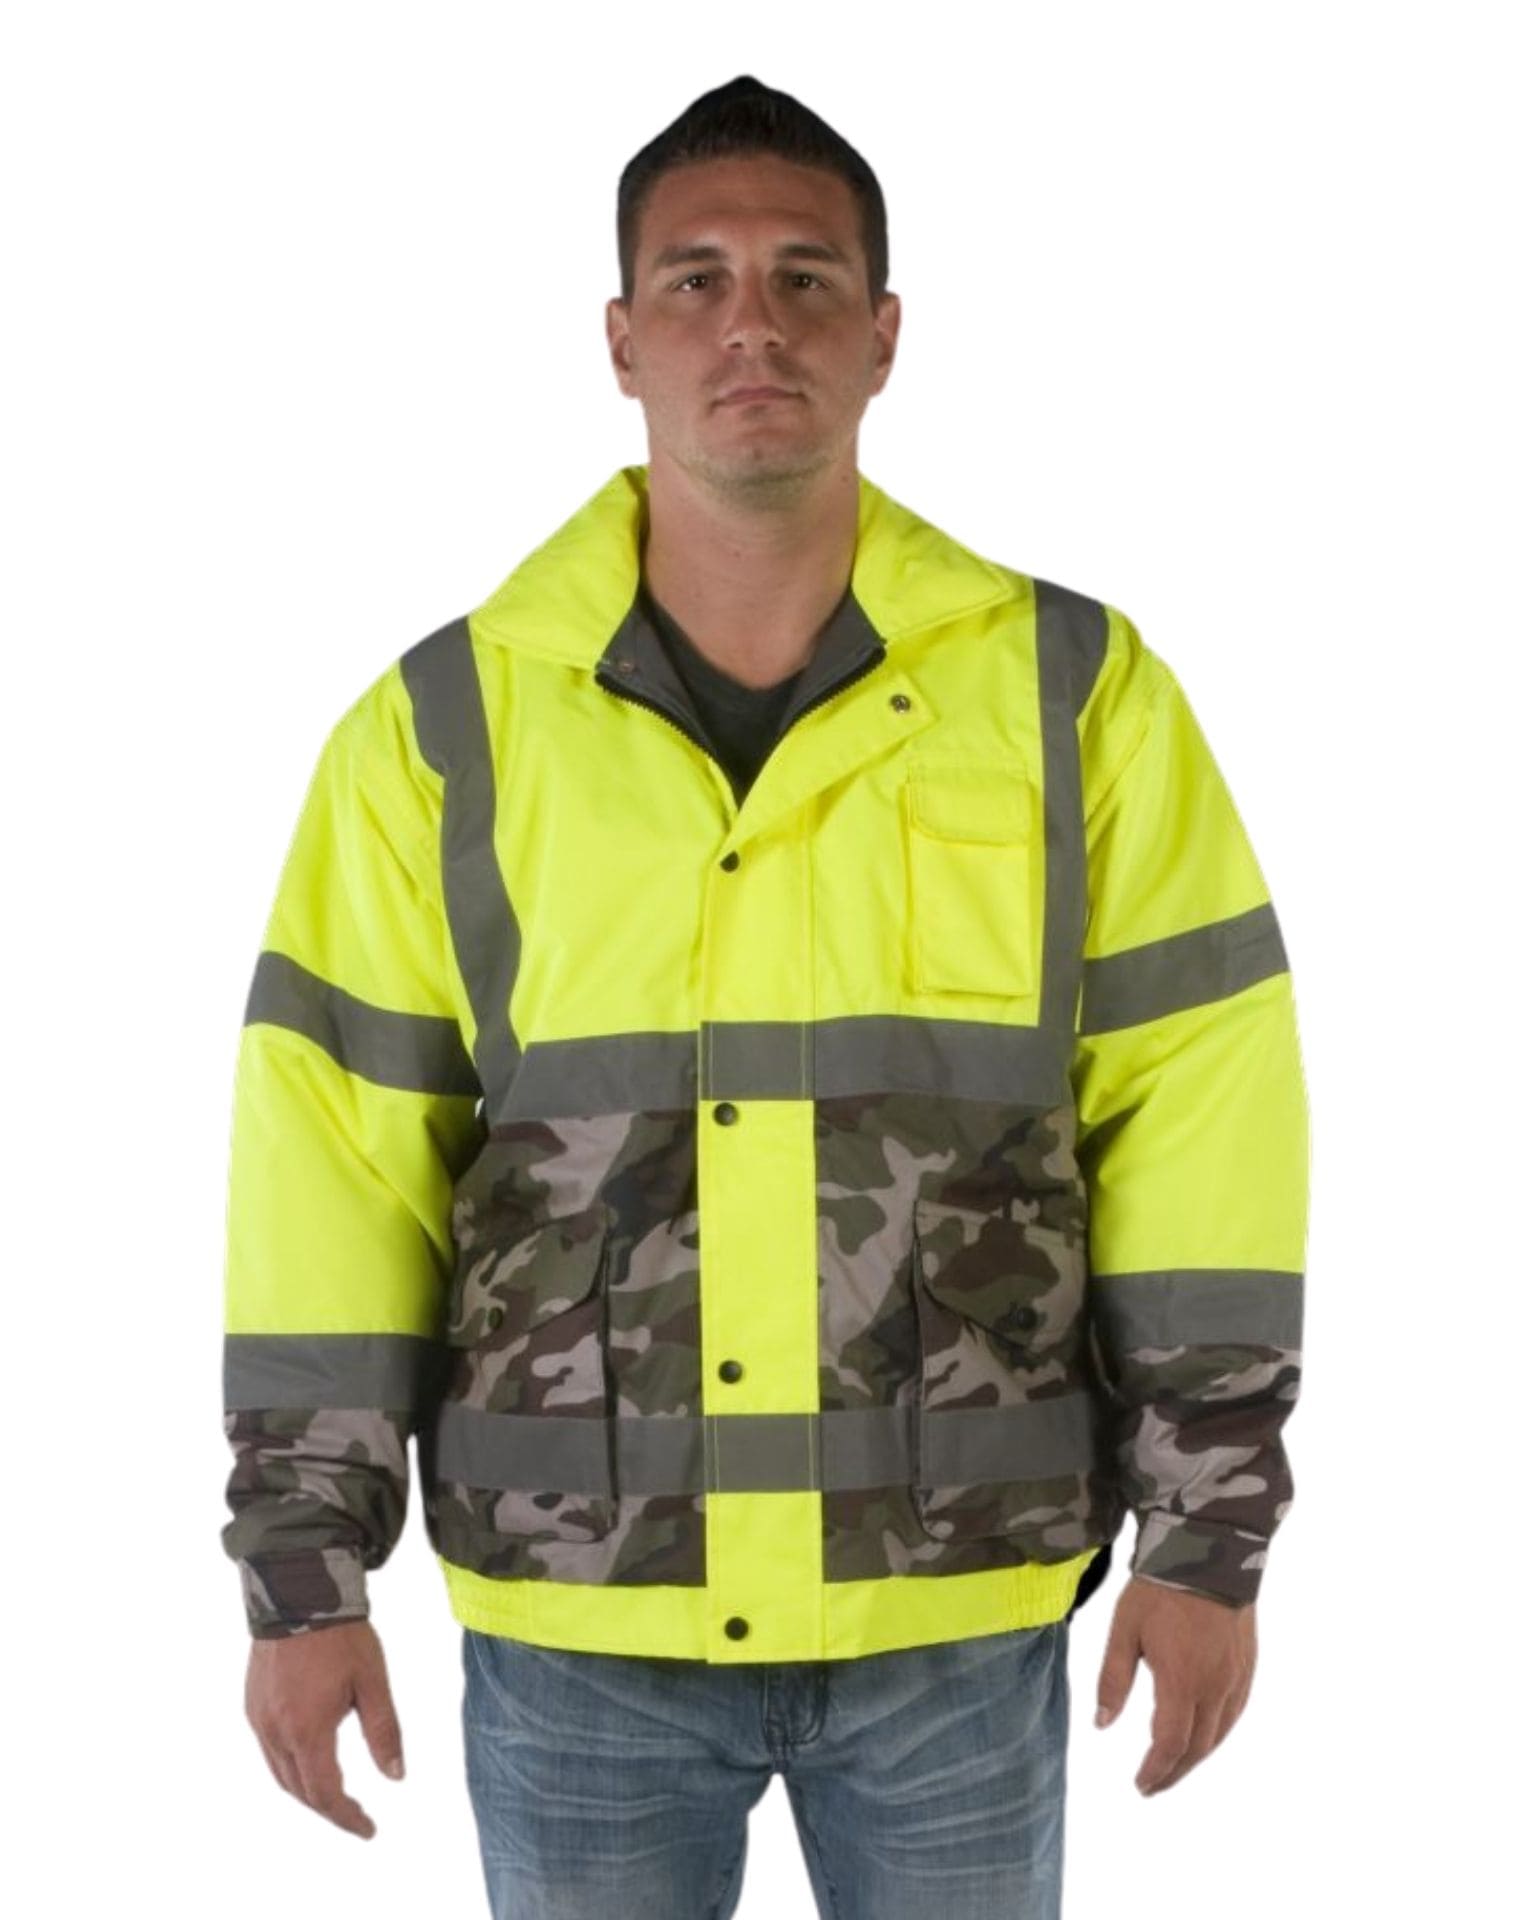 UHV561 High Visibility Bomber with Camo Bottom - SPECIAL EDITION - Utility Pro Wear